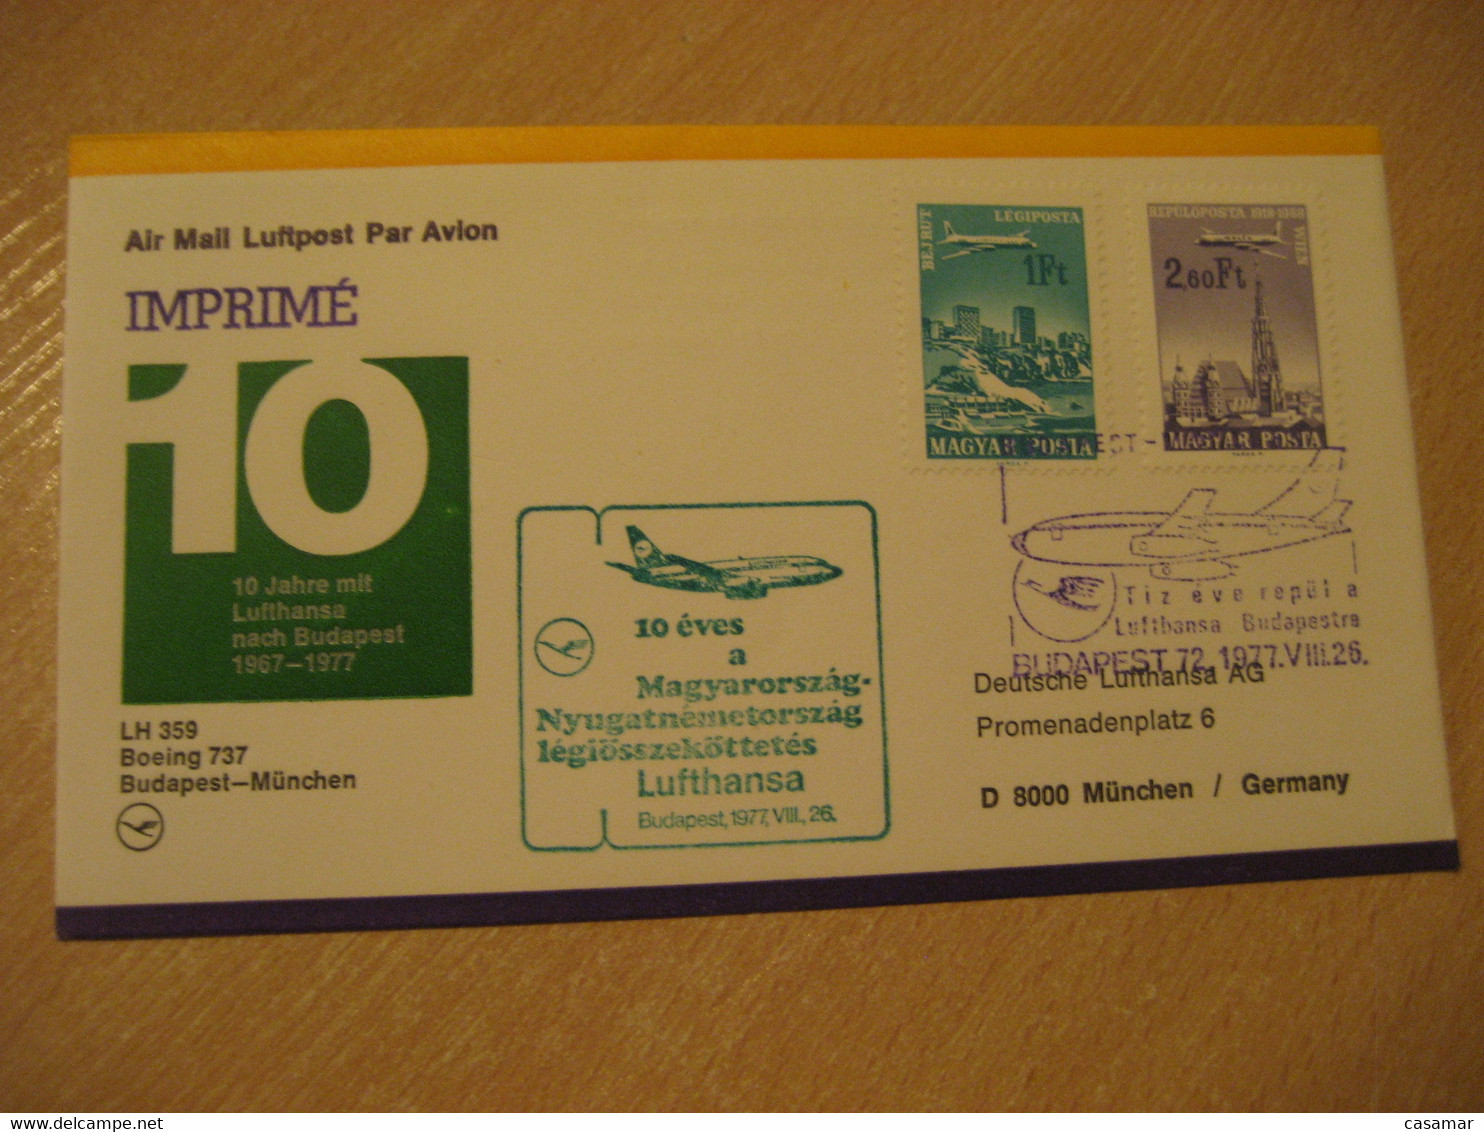 BUDAPEST Munchen 1977 Lufthansa Airlines Airline Boeing 737 First Flight Green Cancel Cover HUNGARY GERMANY - Briefe U. Dokumente